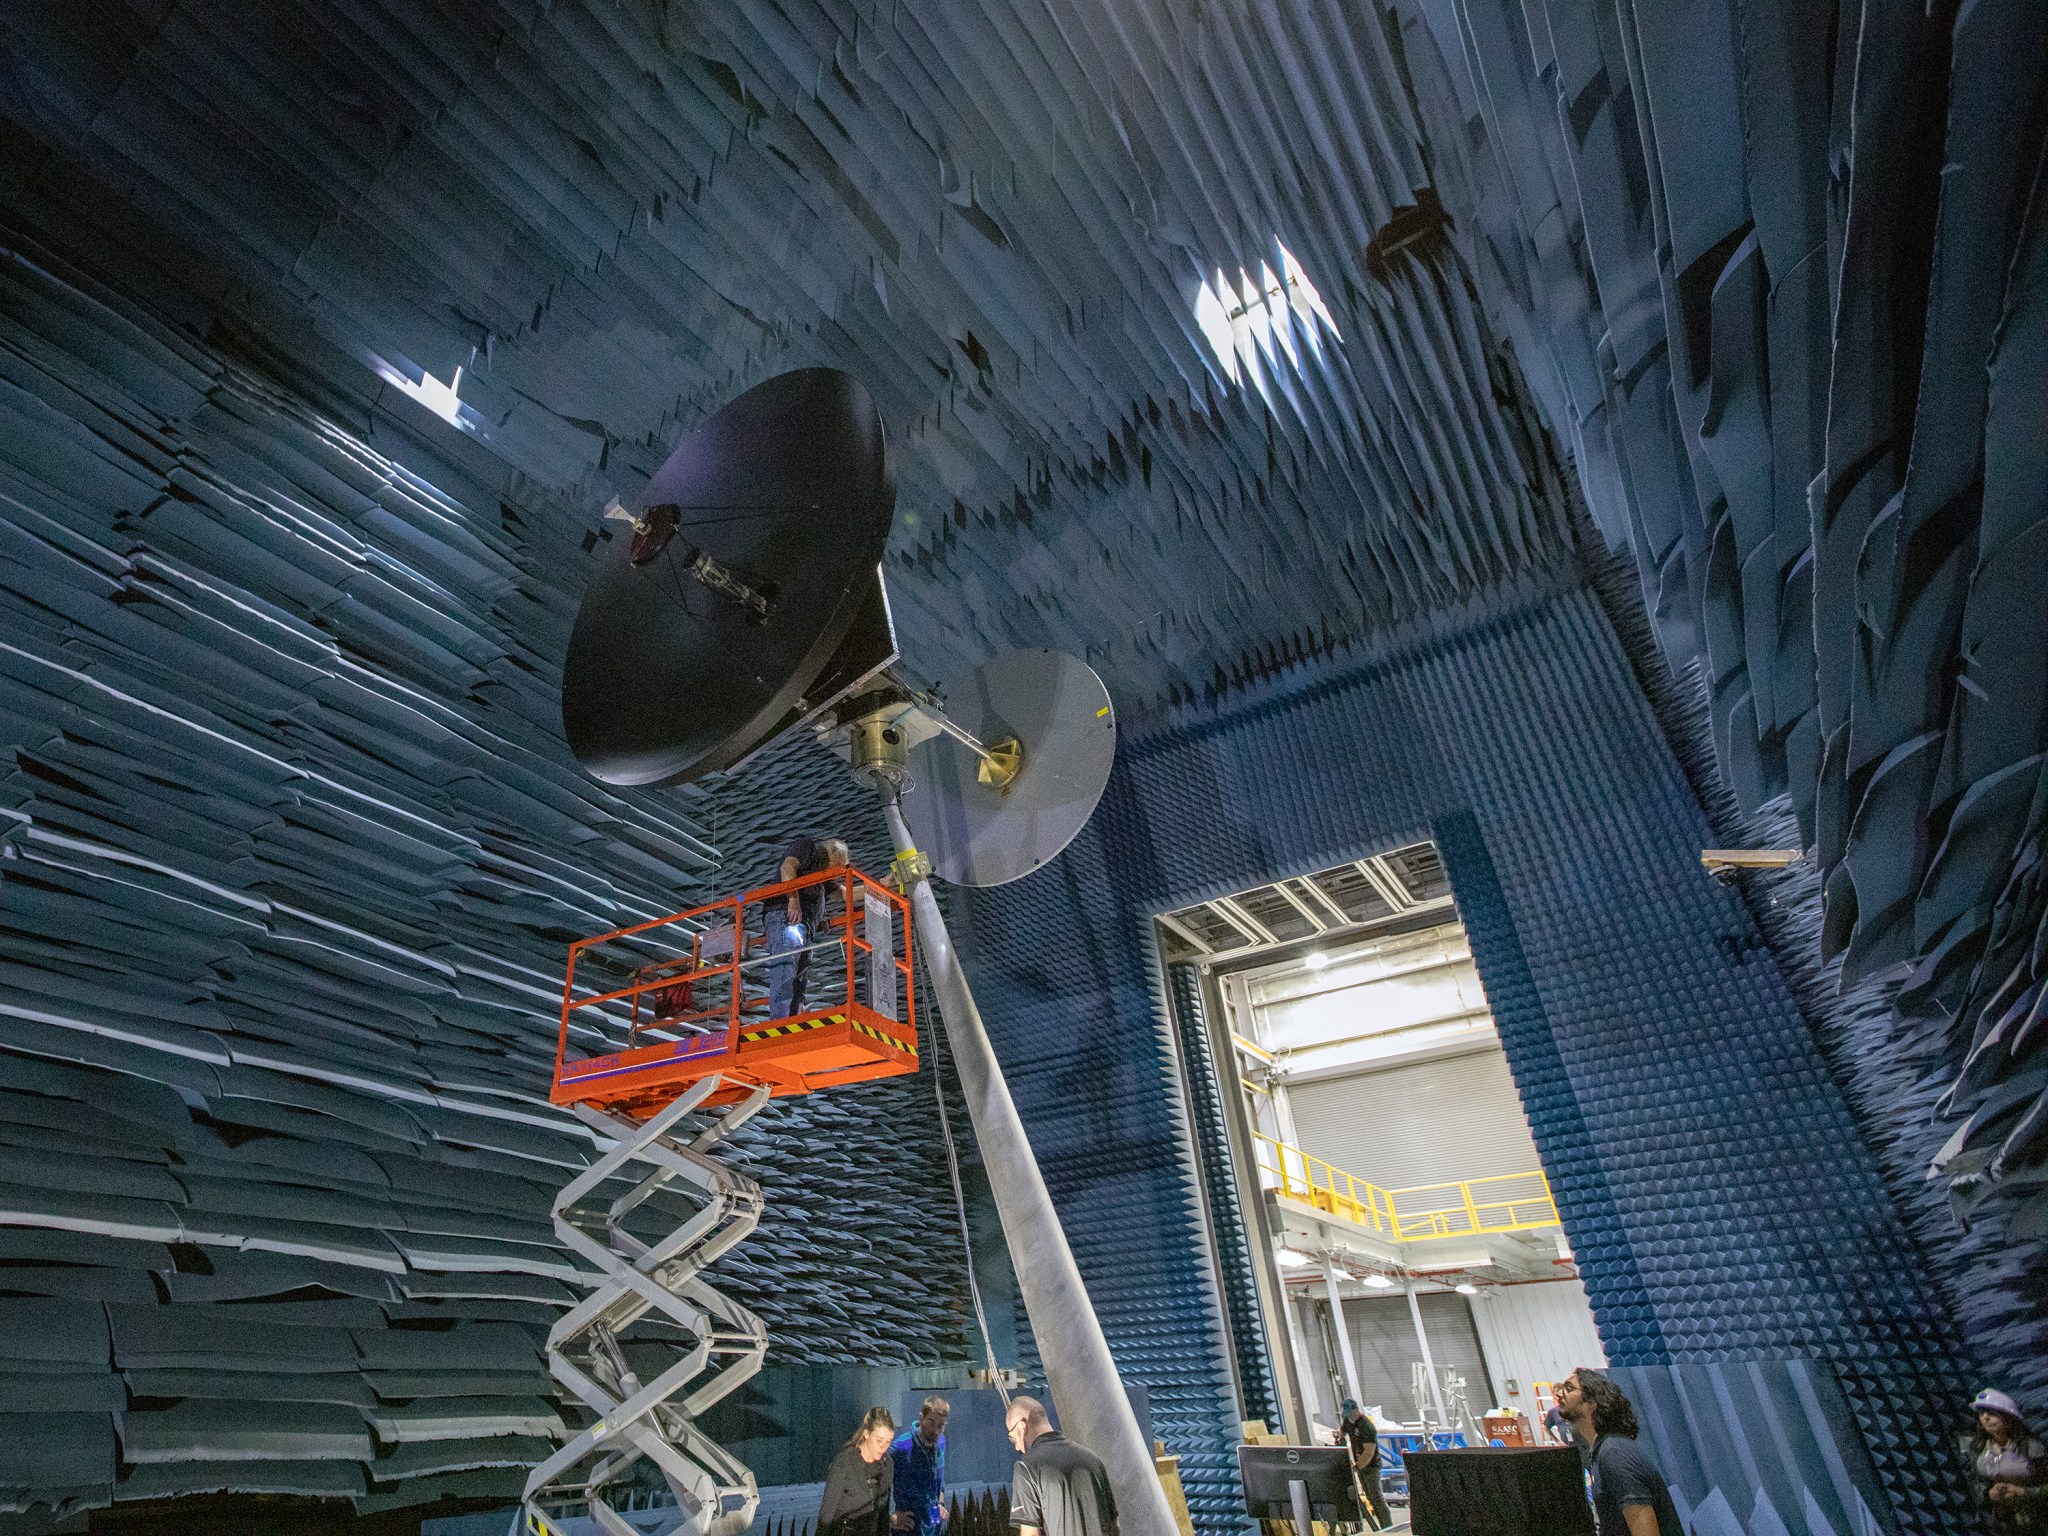 The High Gain Antenna (HGA) for the Europa Clipper recently underwent testing at the Experimental Test Range (ETR) at NASA’s Langley Research Center in Hampton, Virginia.